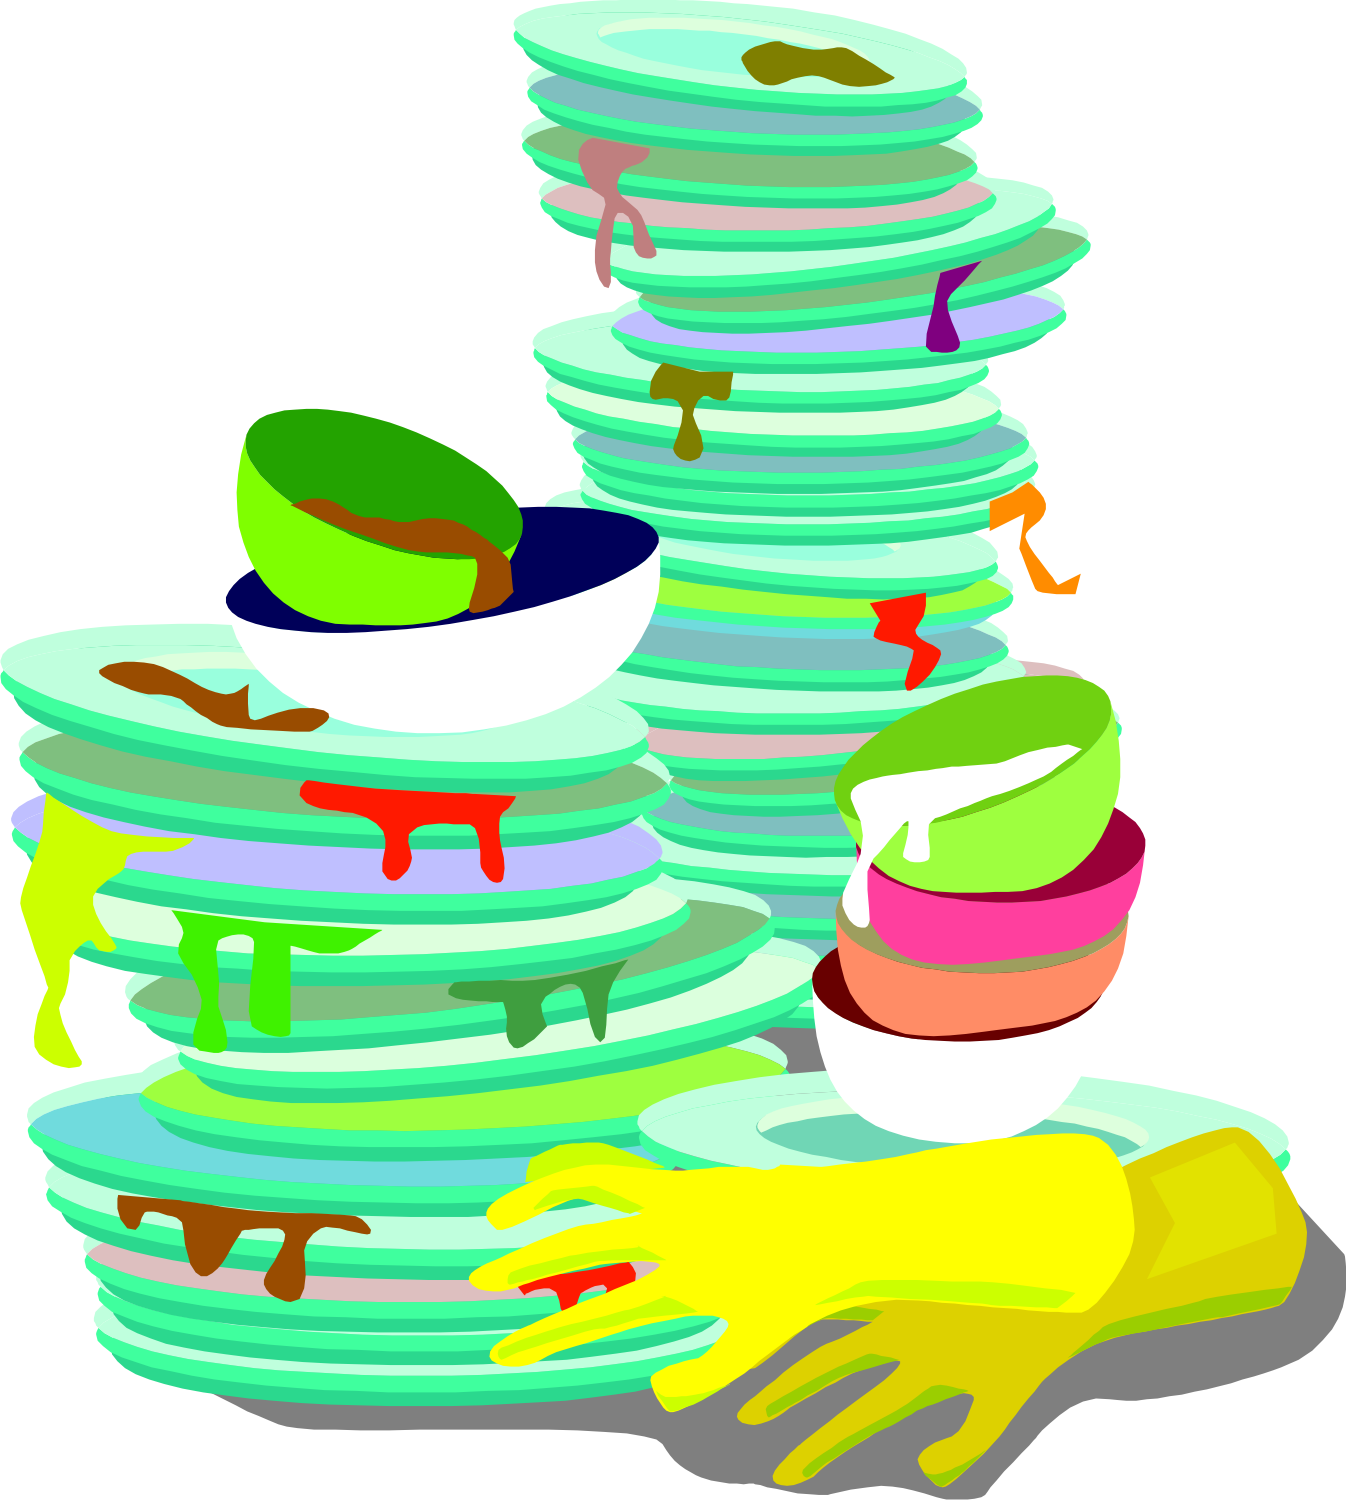 Clip Arts Related To : Fast Food Png Download Dish. view all Dirty Dishes P...